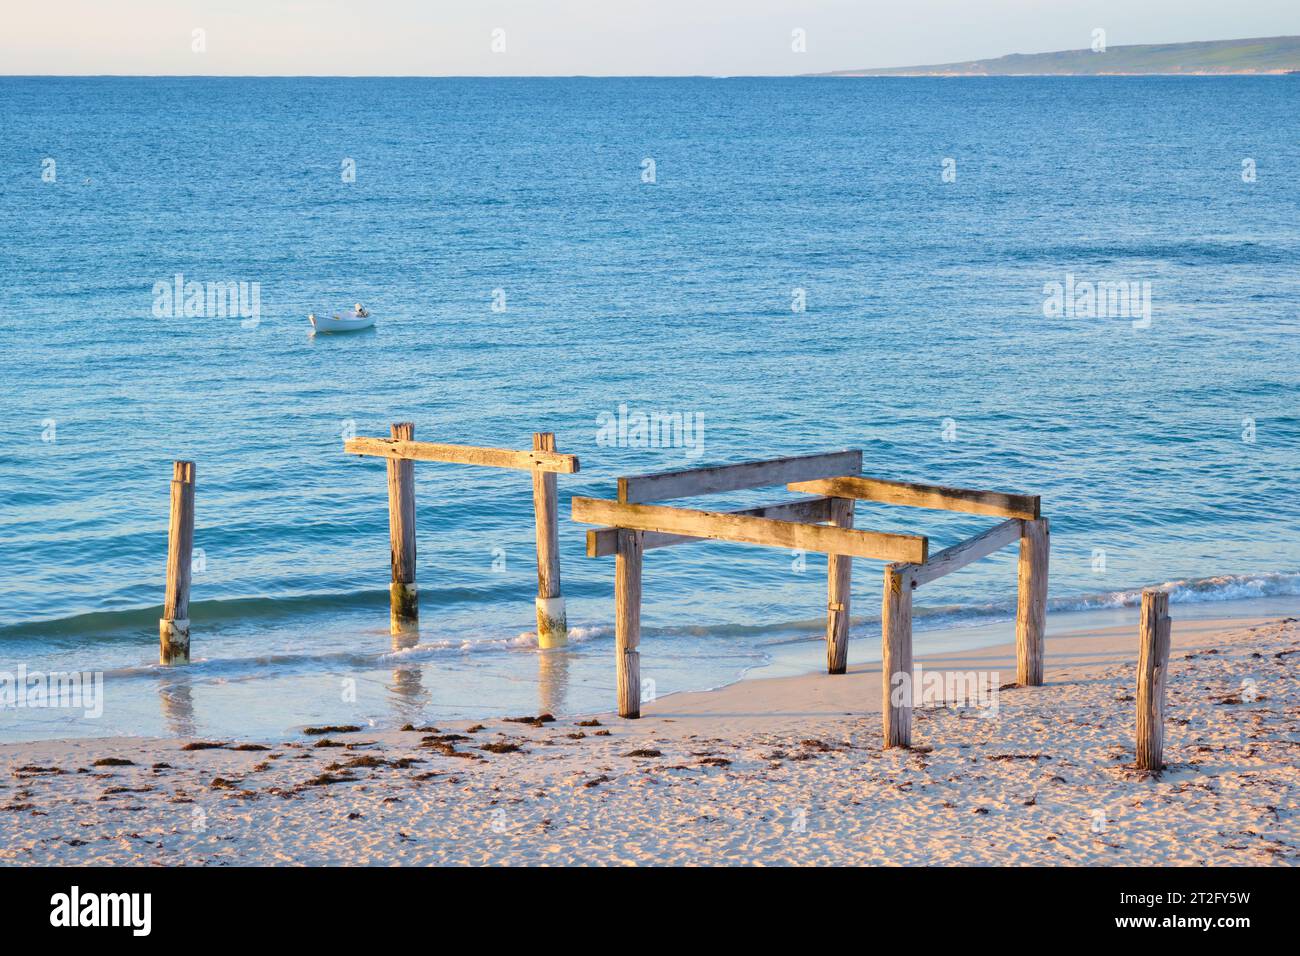 Remains of the old jetty in late afternoon light at Hamelin Bay in the south-west region of Western Australia. Stock Photo